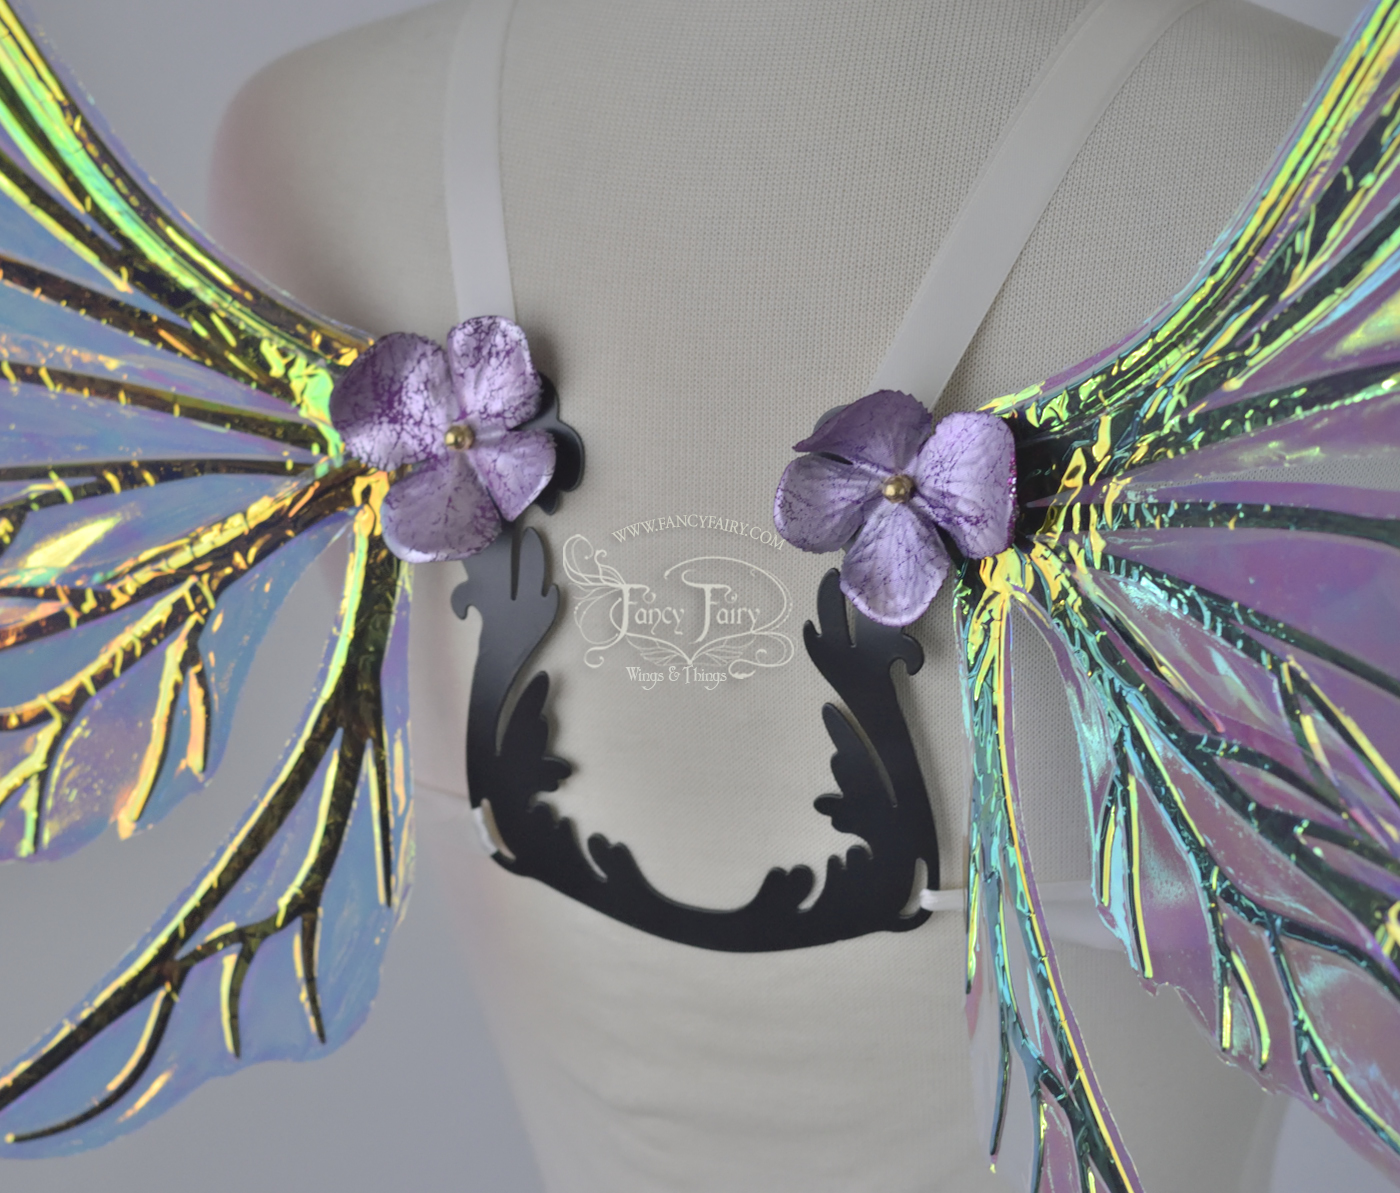 Aphrodite Convertible Iridescent Fairy Wings in Clear Diamond Fire with White Veins